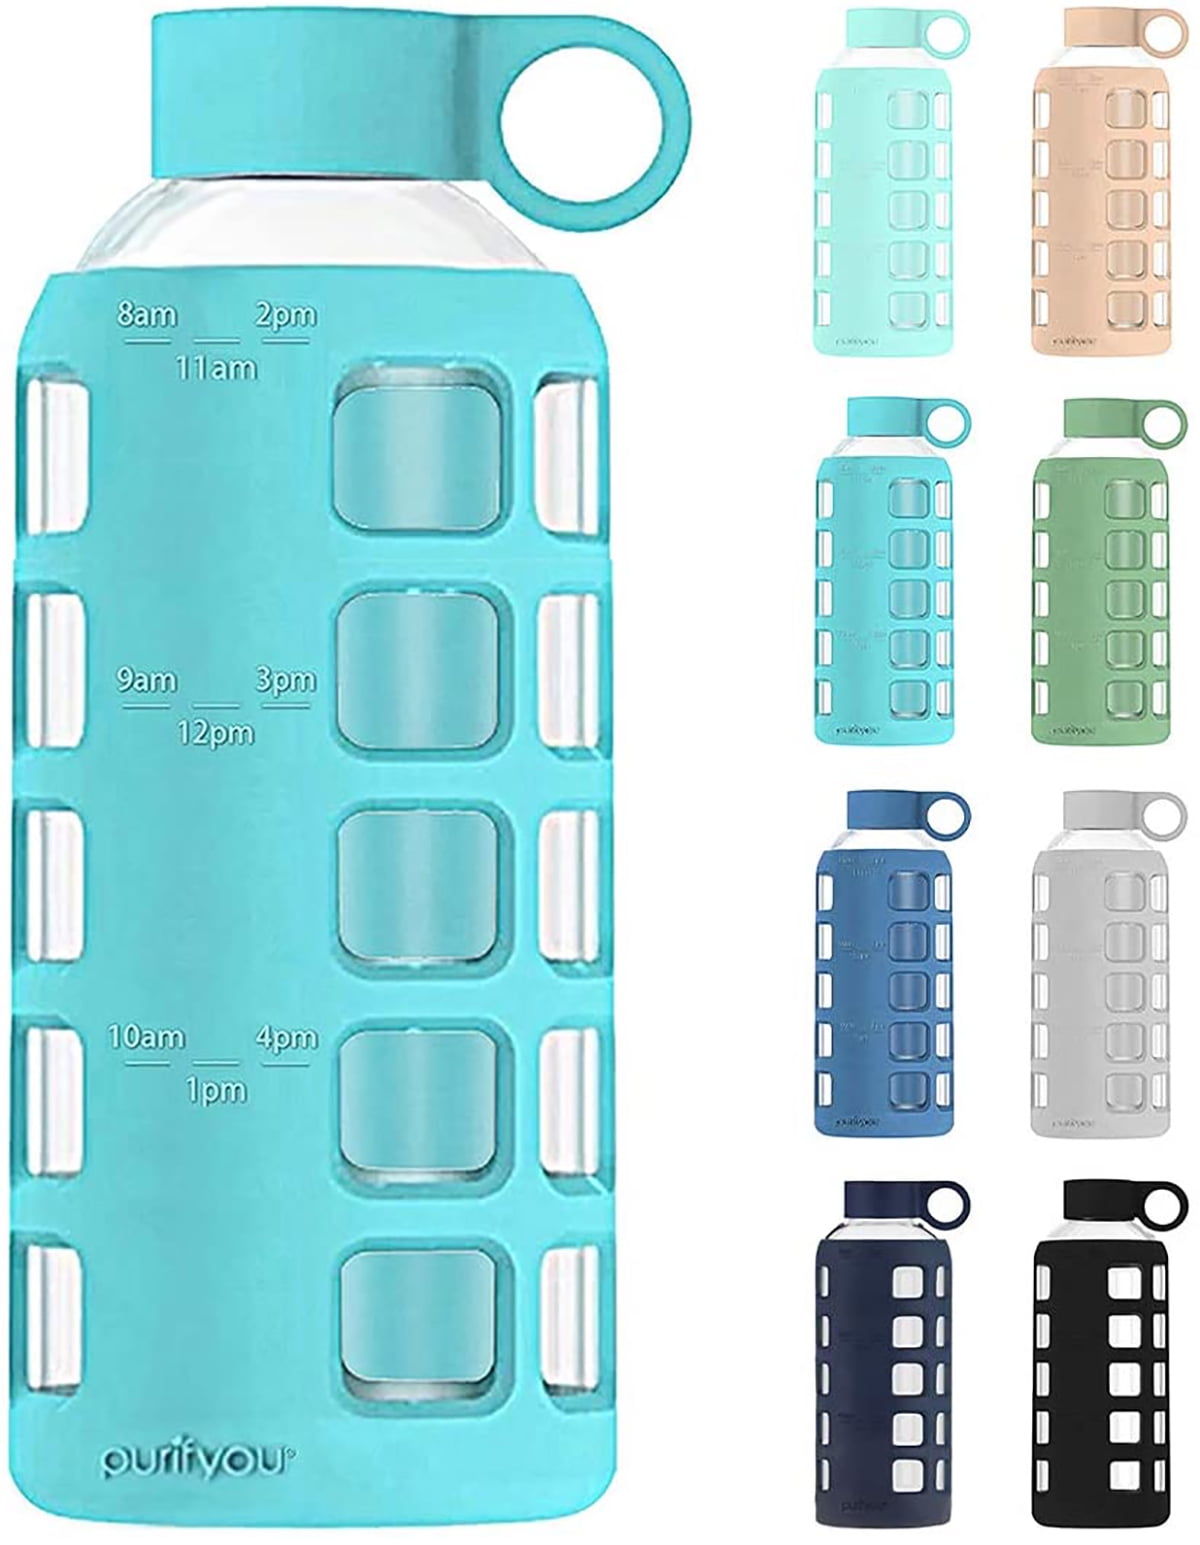 Purifyou Premium 40/32 / 22/12 oz Glass Water Bottles with Volume & Times to Drink, Silicone Sleeve & Stainless Steel Lid Insert, Reusable Bottle